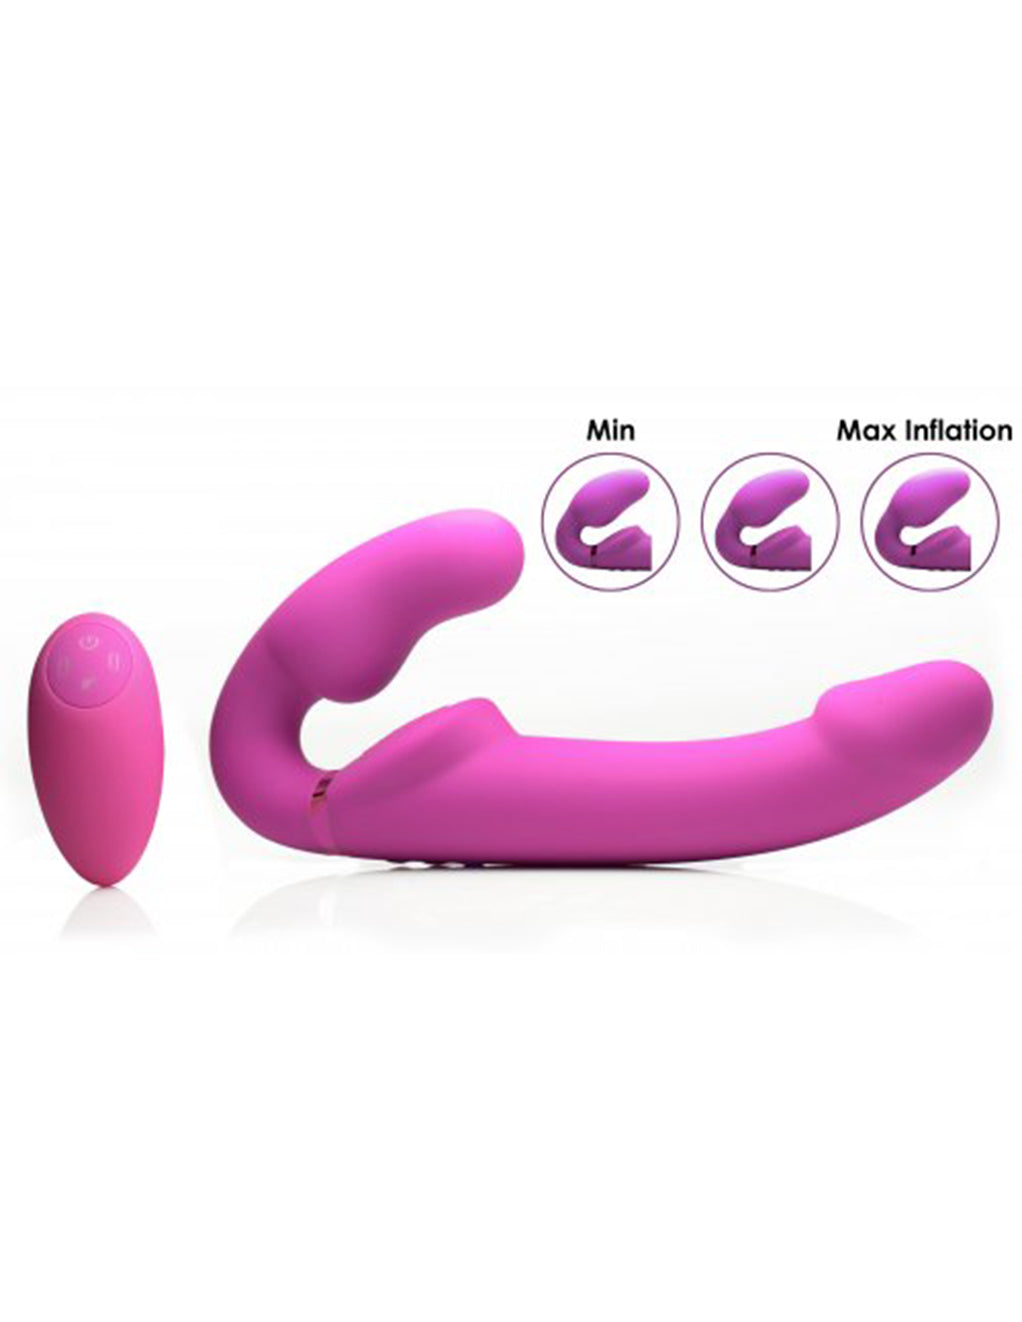 Strap U Inflatable Vibrating Strapless Strap-On